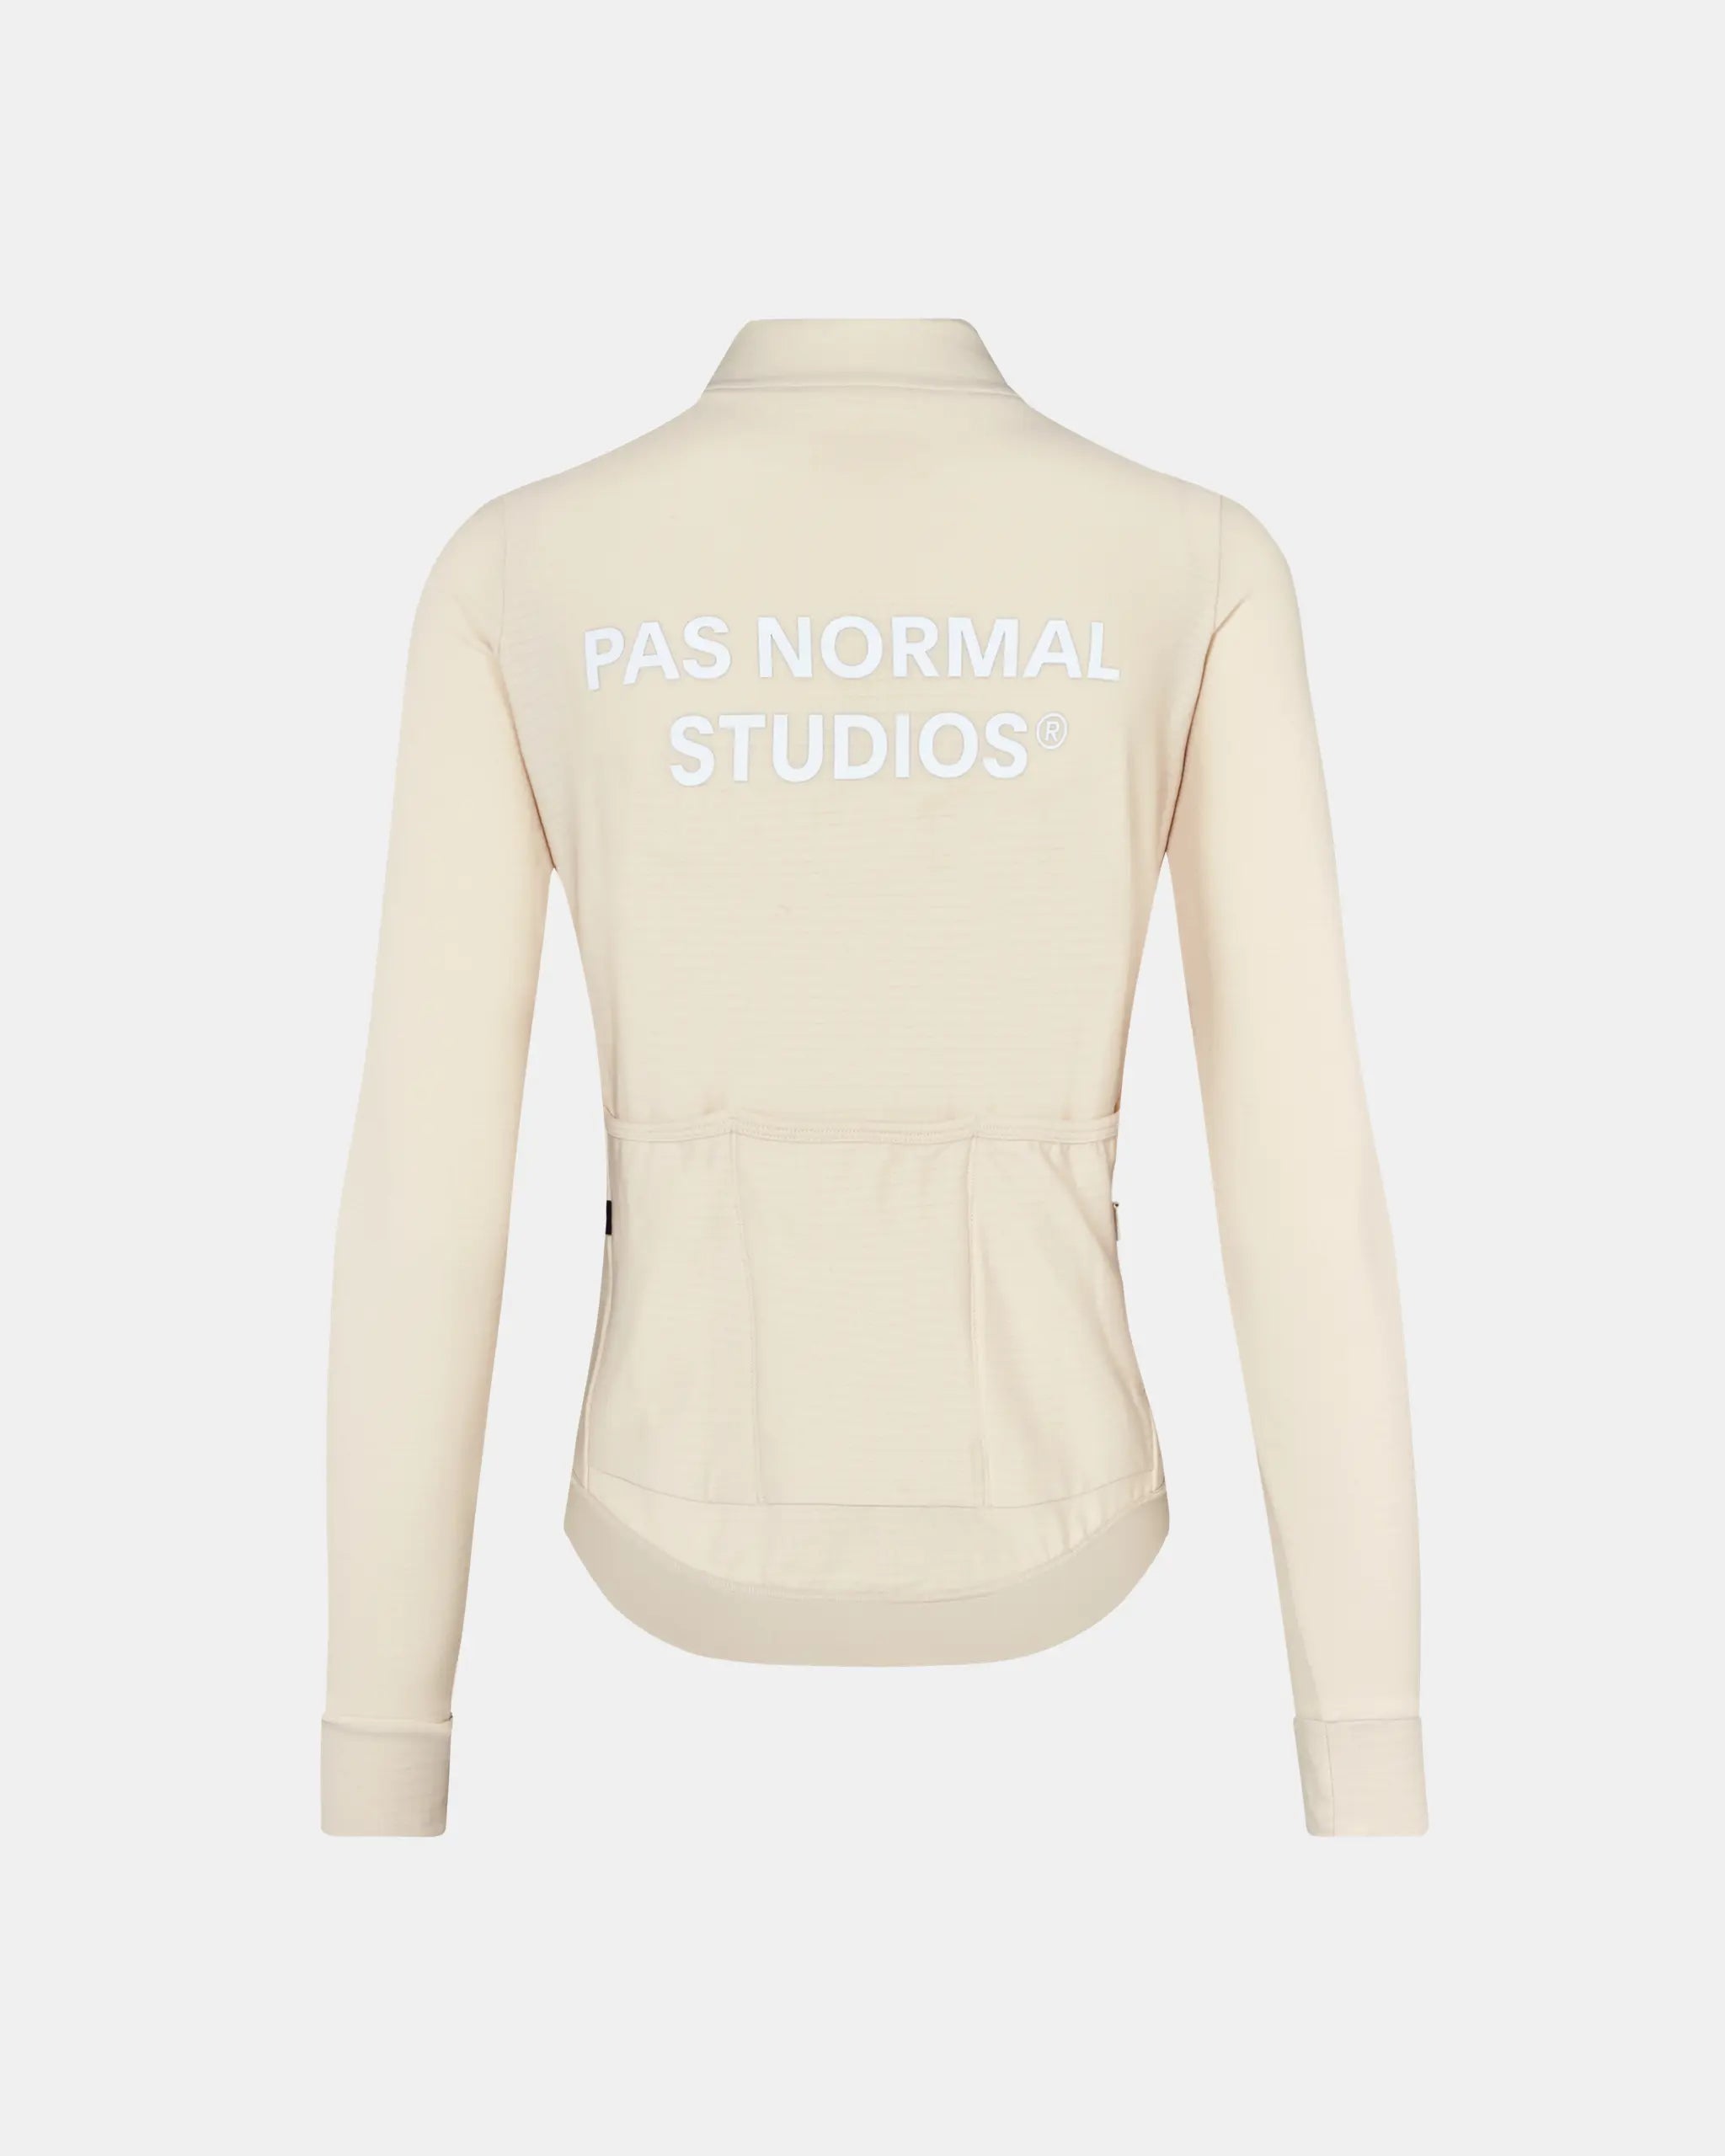 Pas Normal Studios Essential Long Sleeve Jersey Off White Women's 